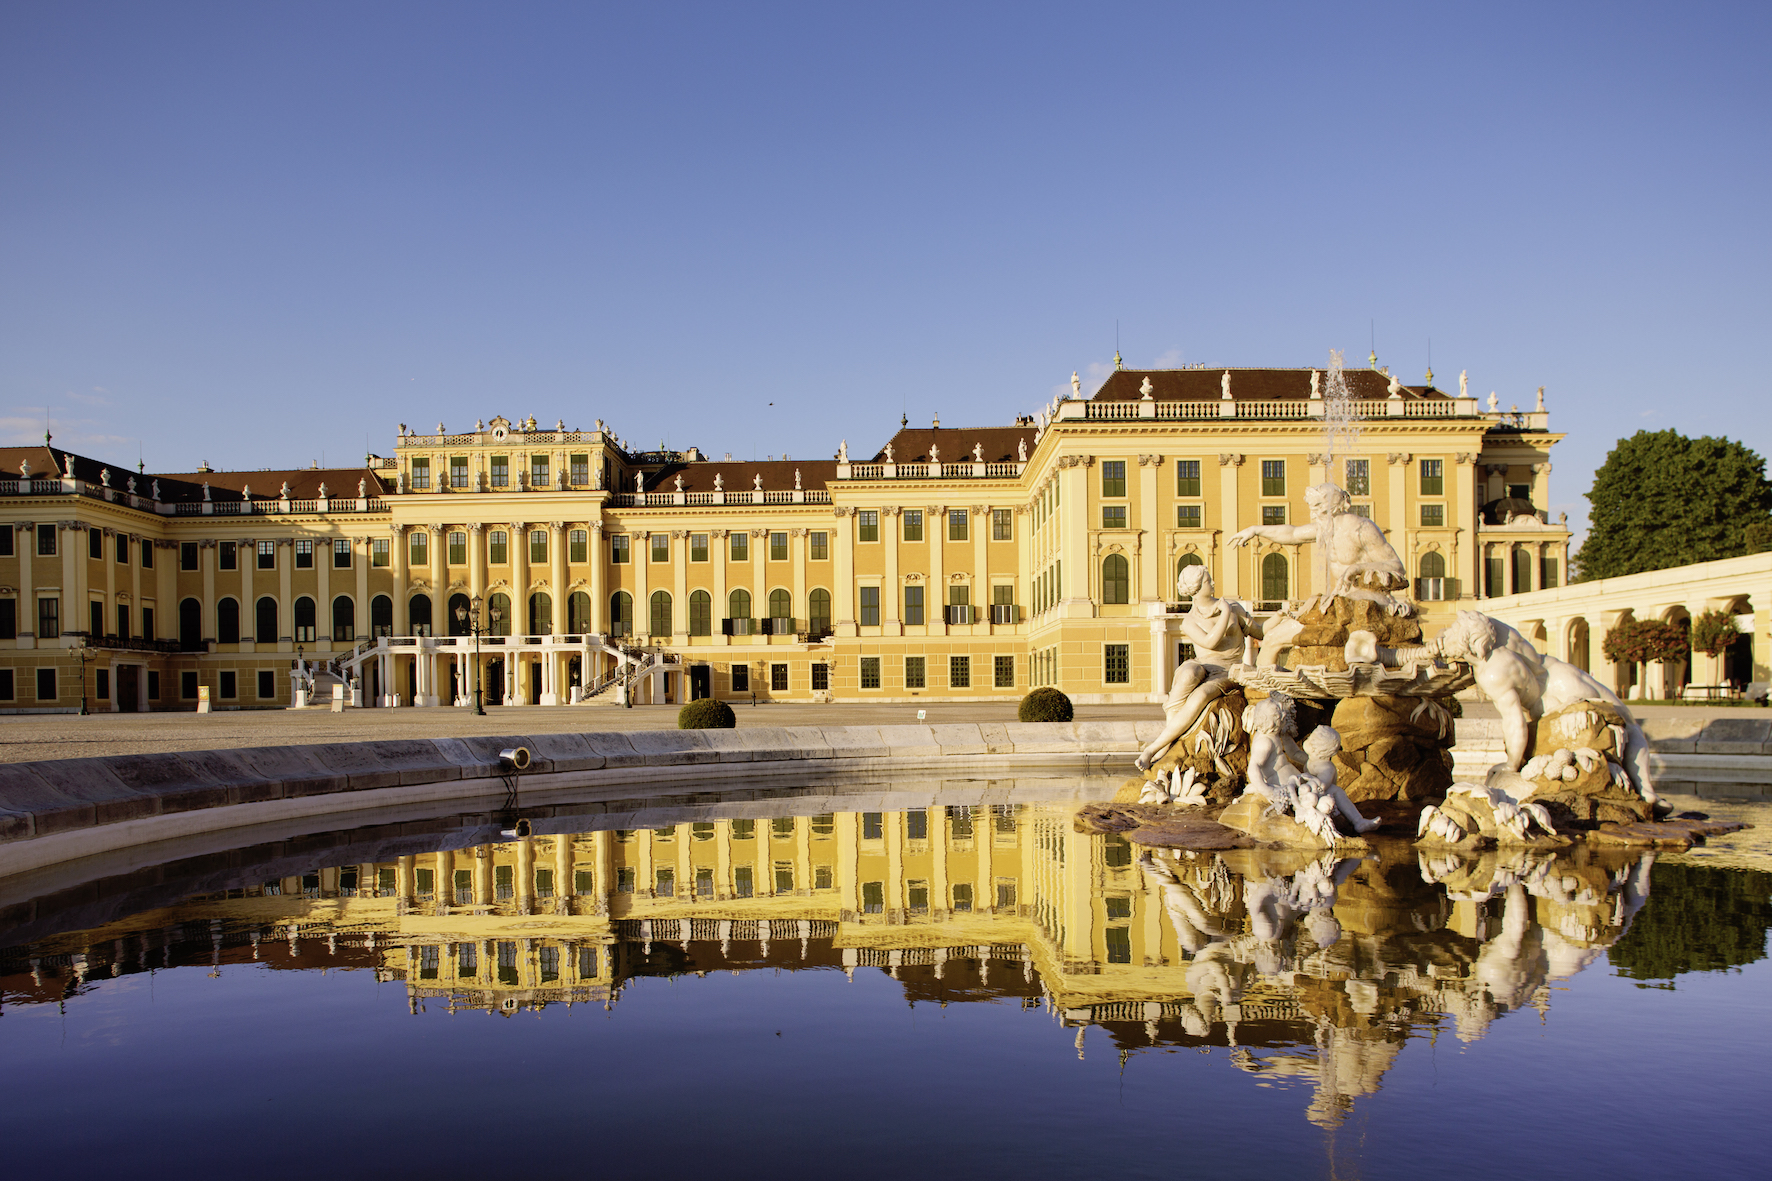 Say hello to Vienna: Exploring Austria’s culture capital with world-class museums, coffee houses and more